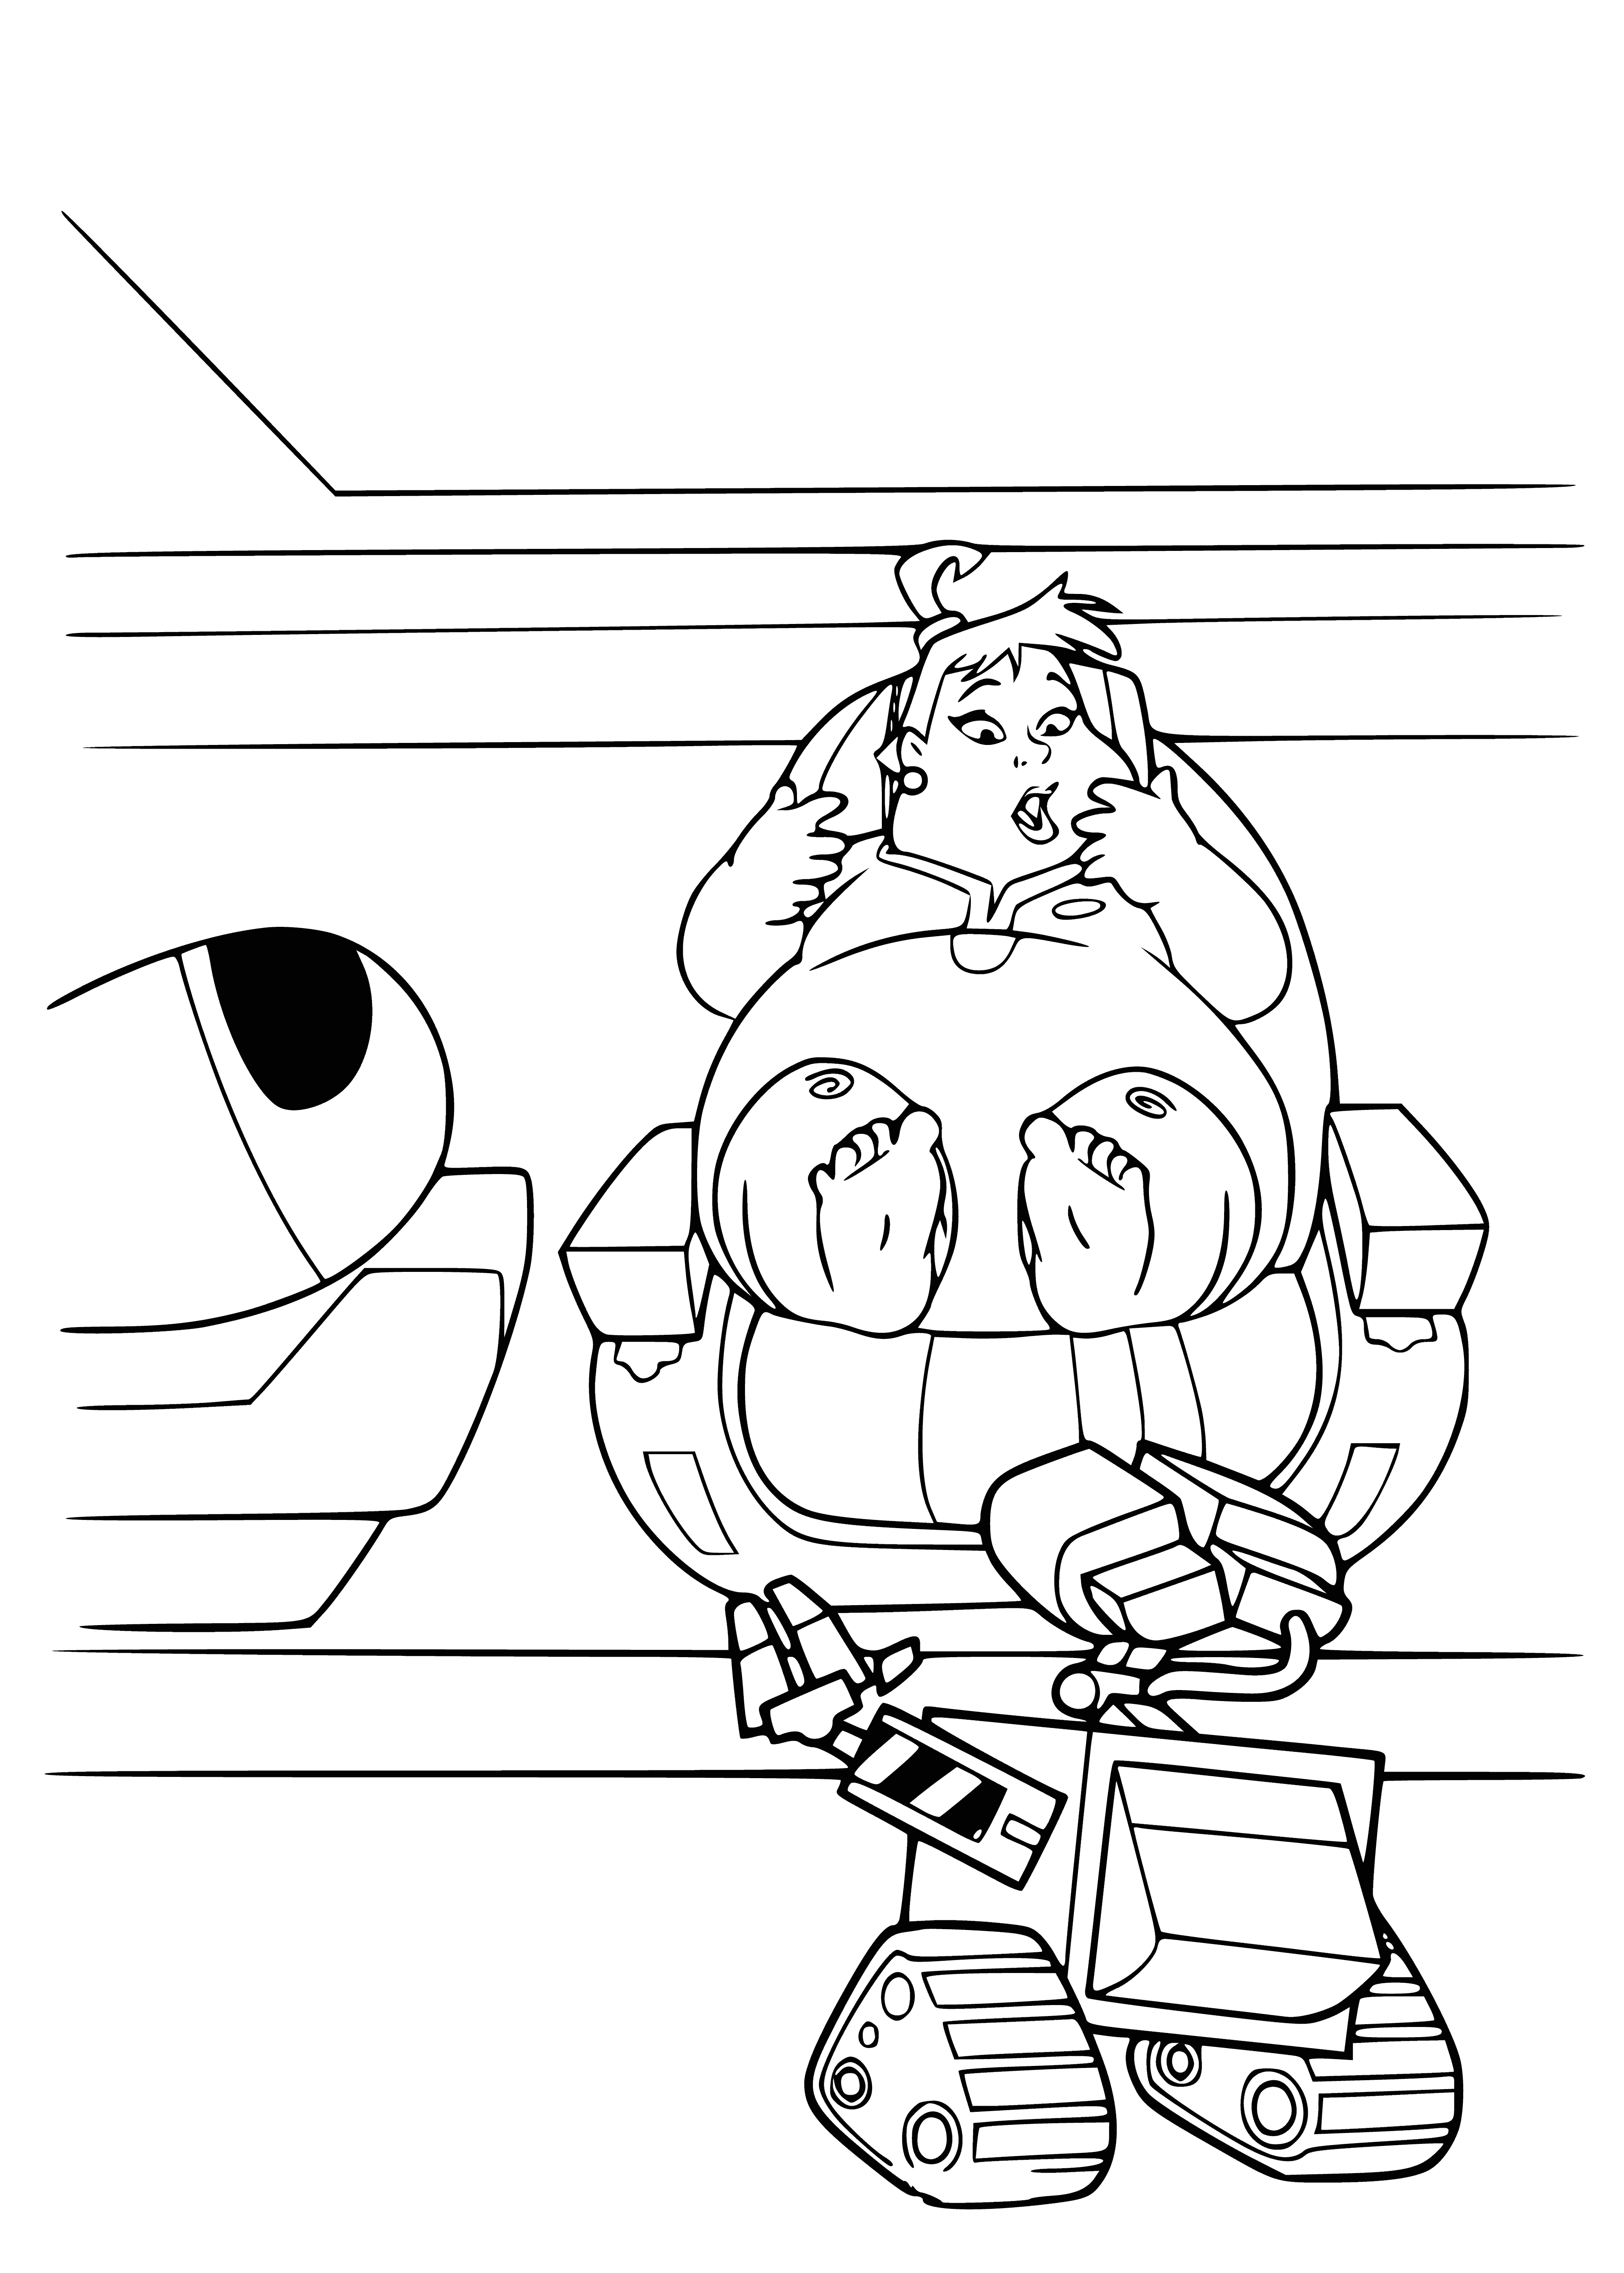 coloring page: Giant BBW Wall-E sits on garbage, back against wall with protruding stomach, small arms and legs, large head with black eyes and sharp teeth.